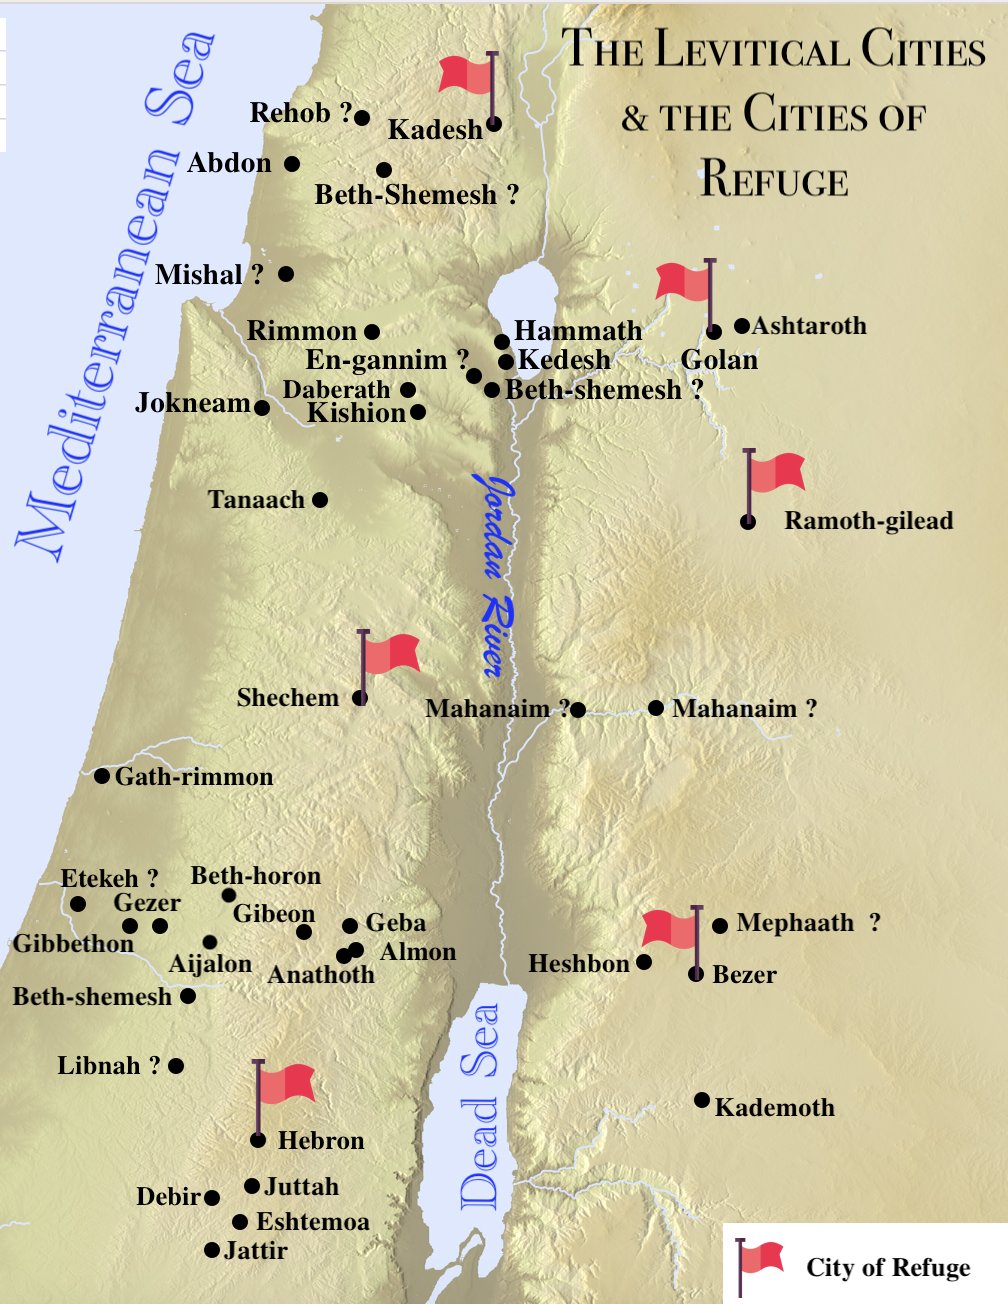 Map of Levitical cities & Cities of Refuge in all of Israel.